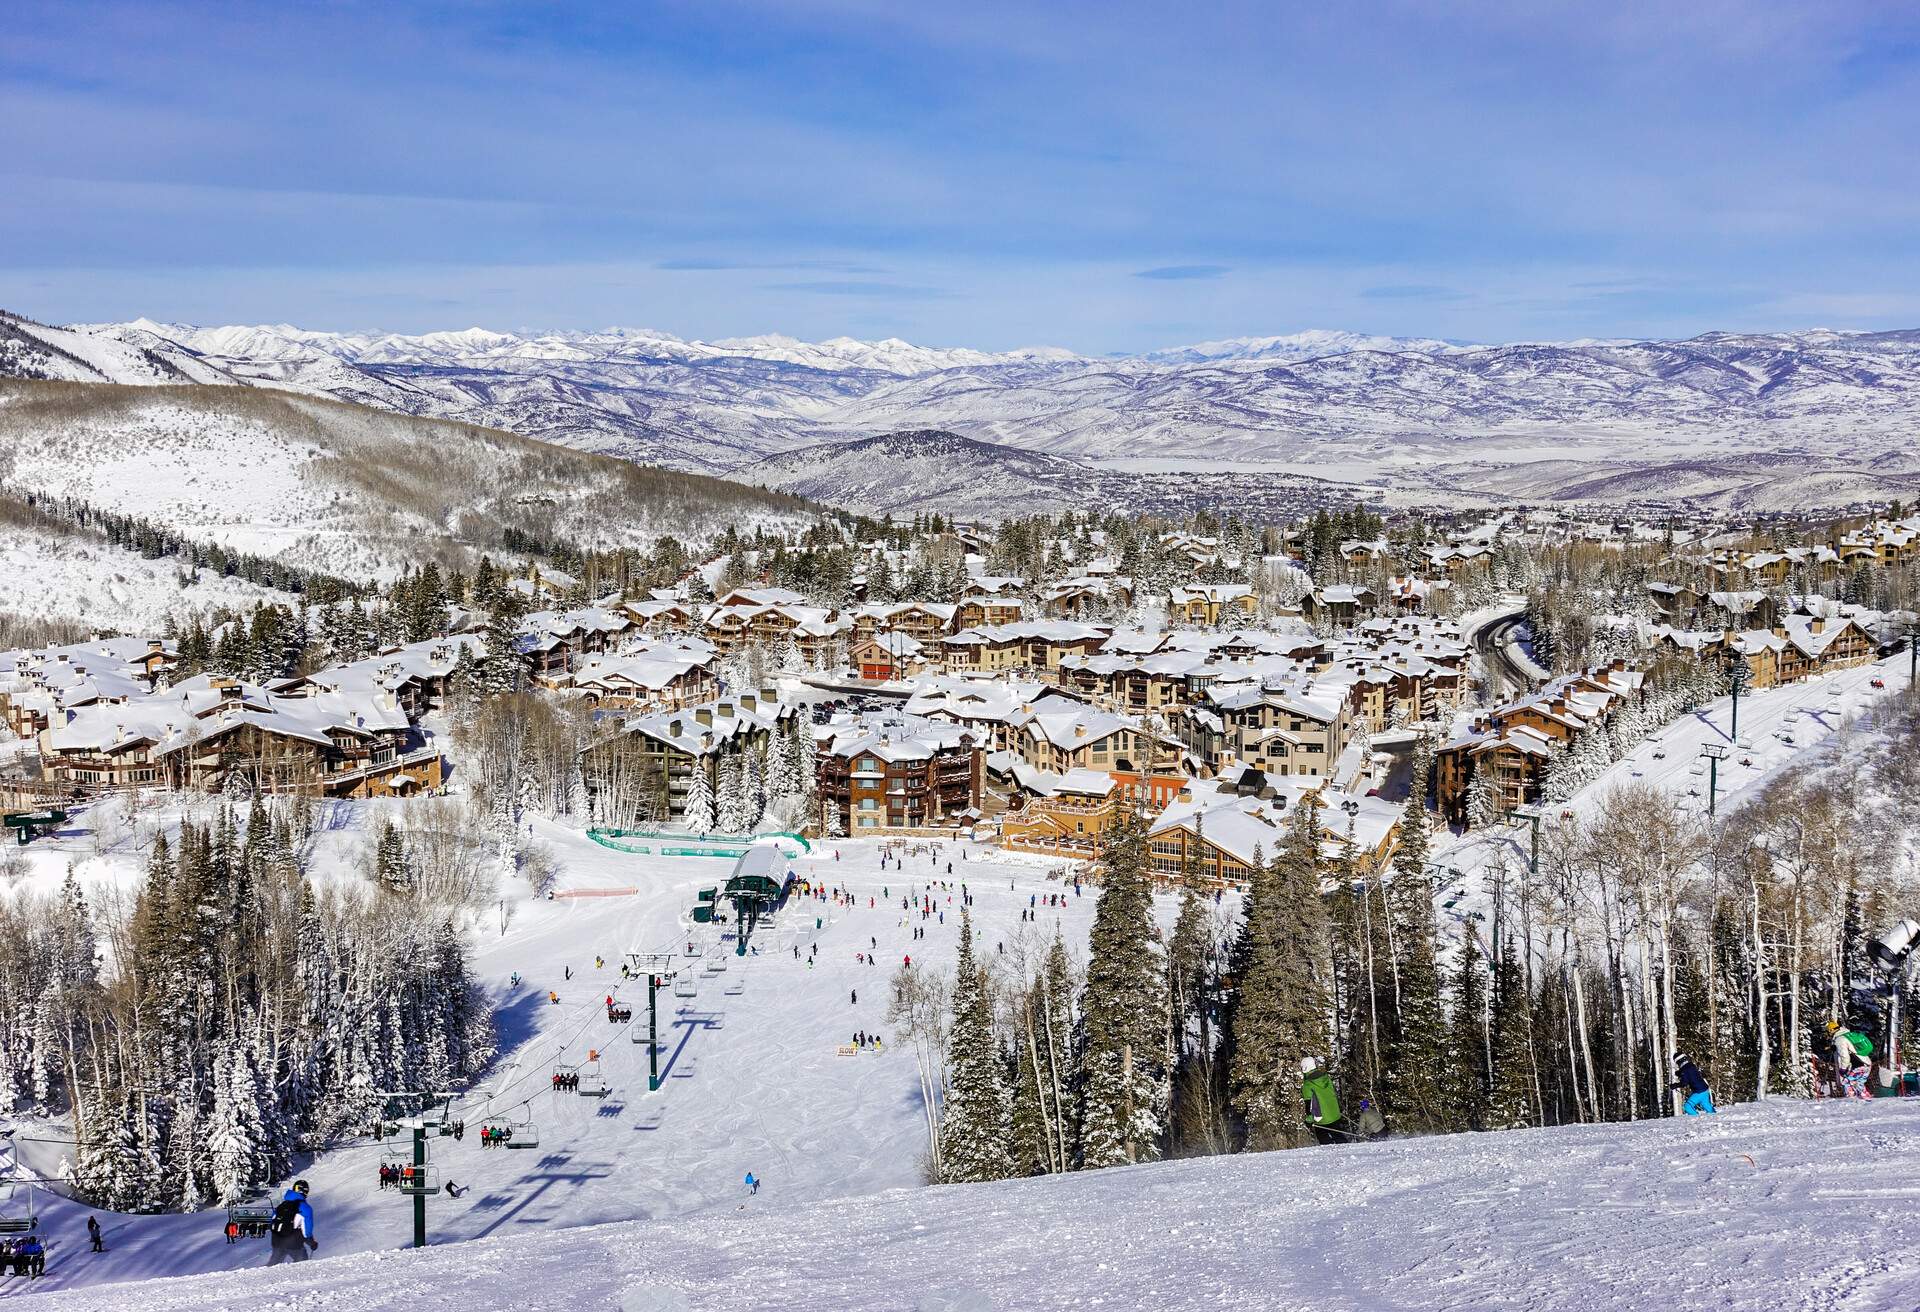 A ski slope with a view of the ski village's urban setting and the crowded ski lift station.